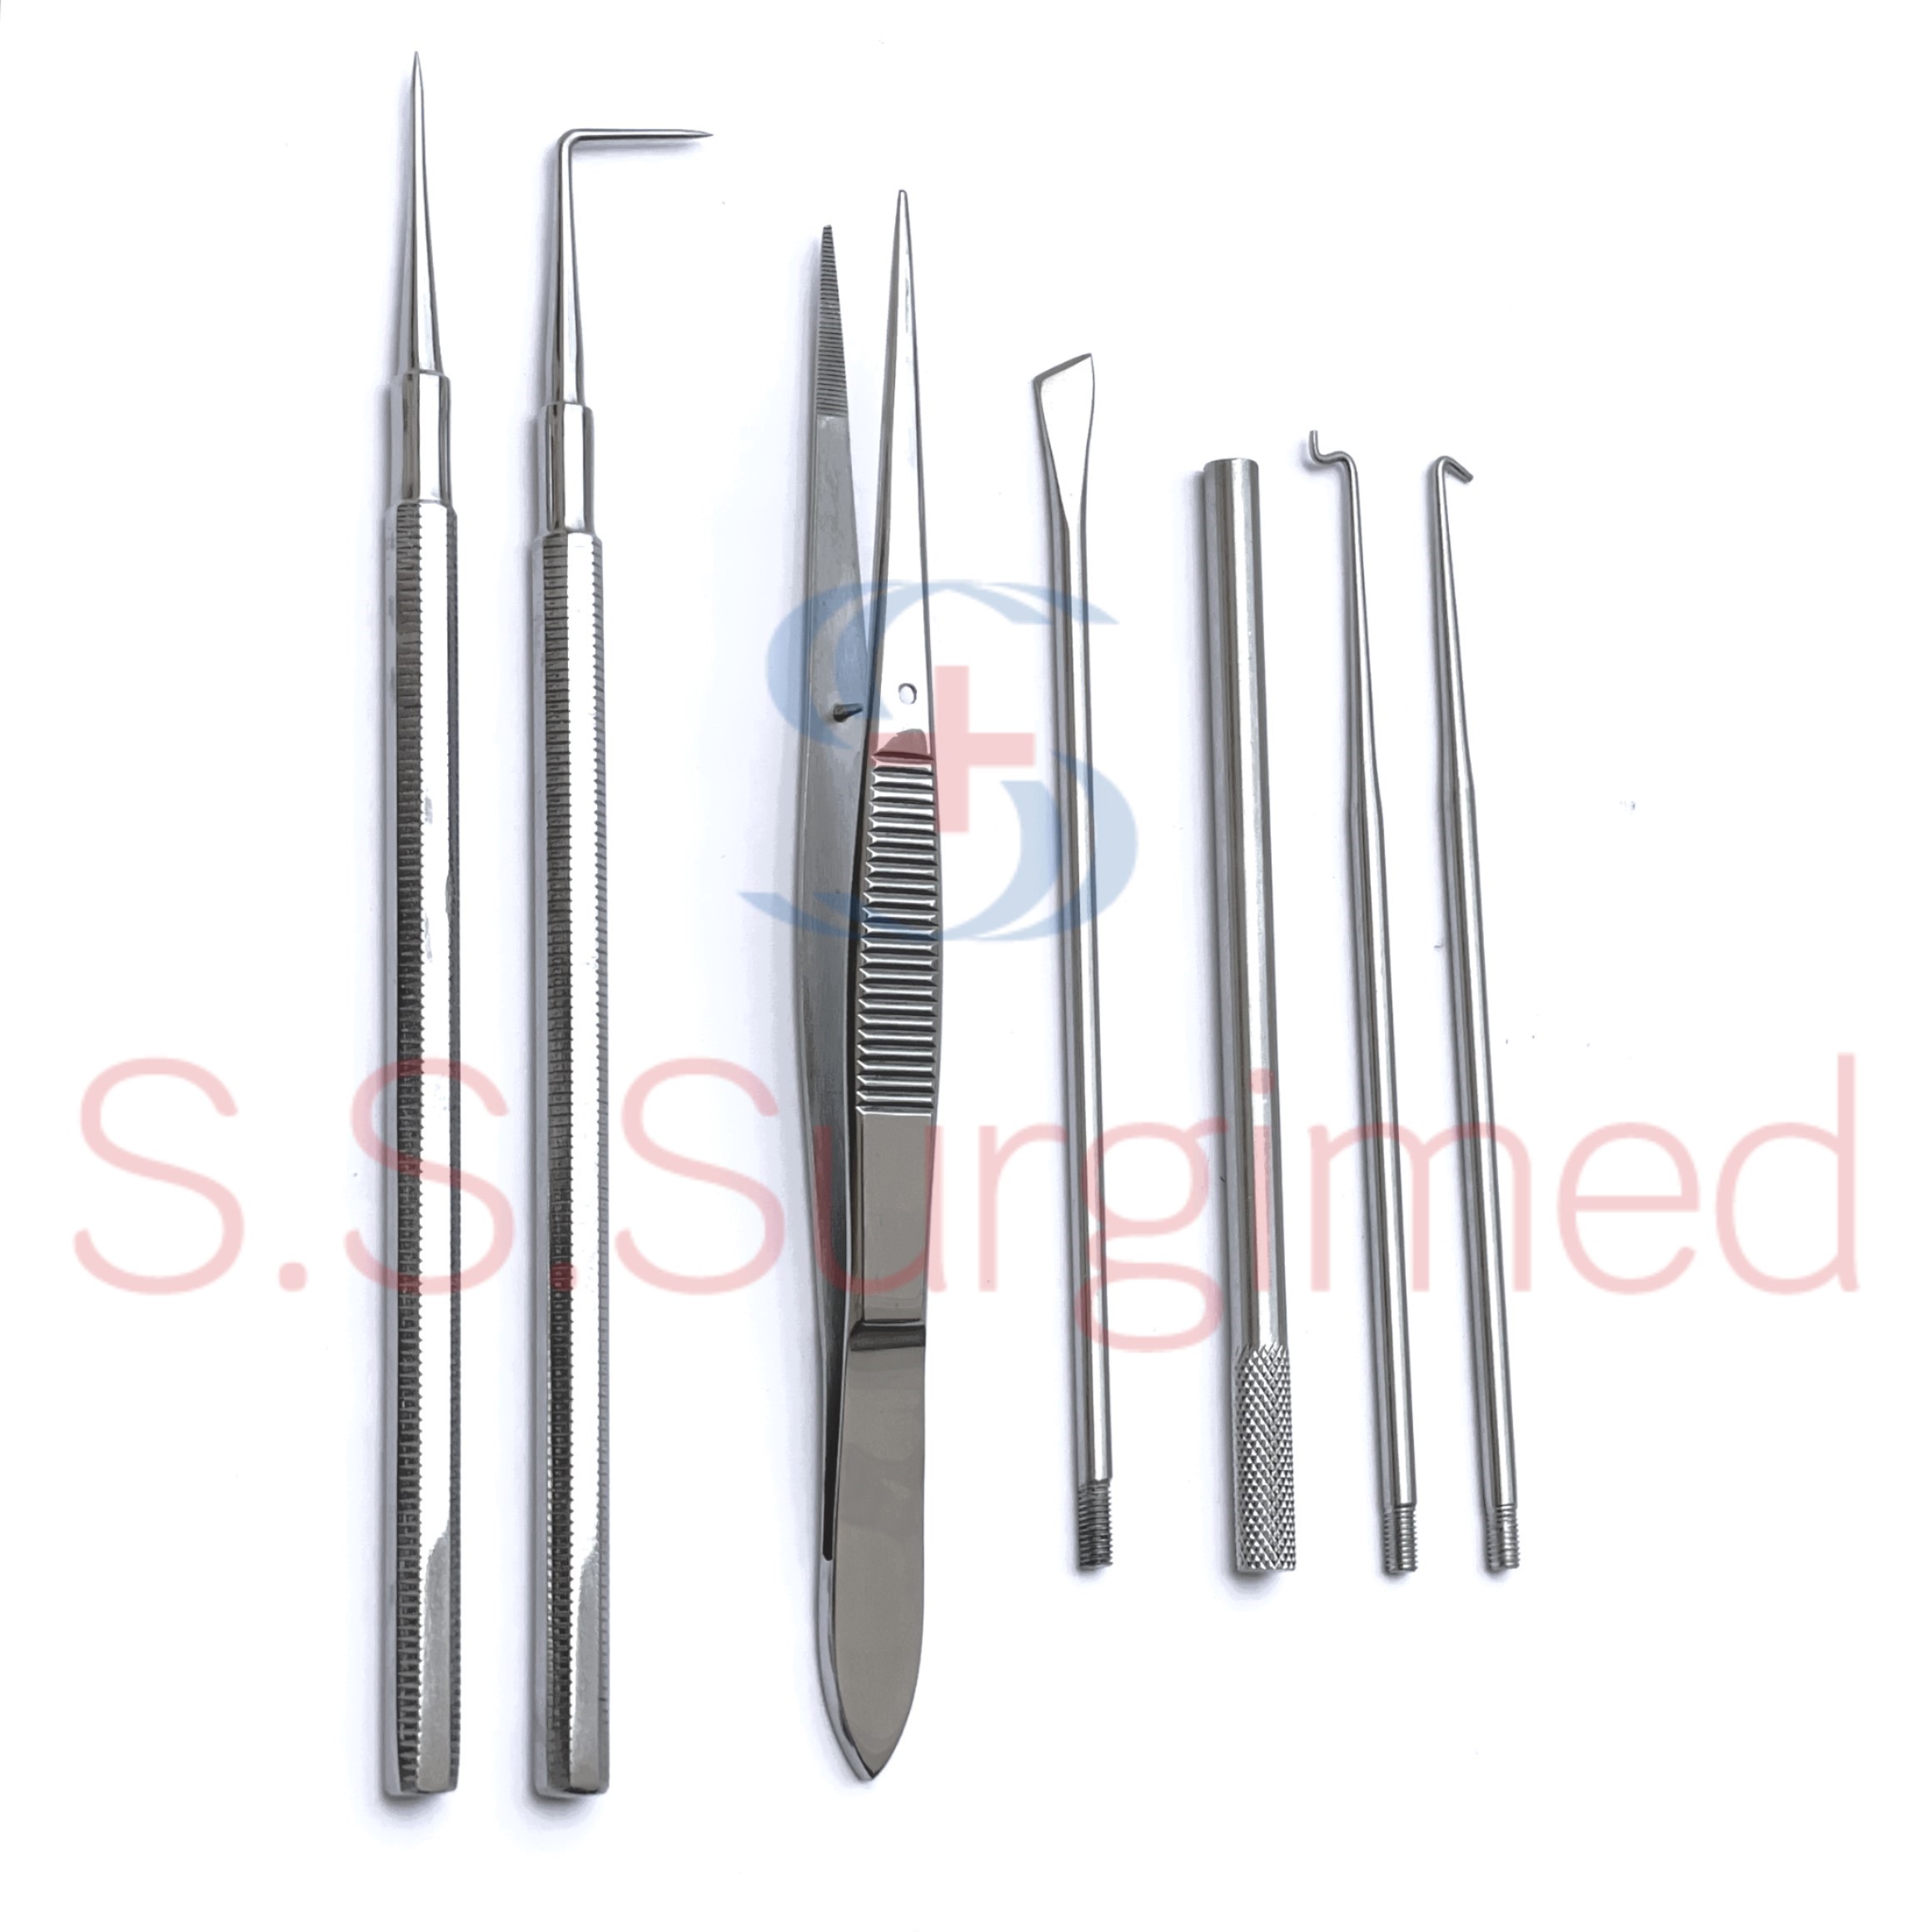 010-042-002 O-Ring Tool Kit - S.S. Surgimed